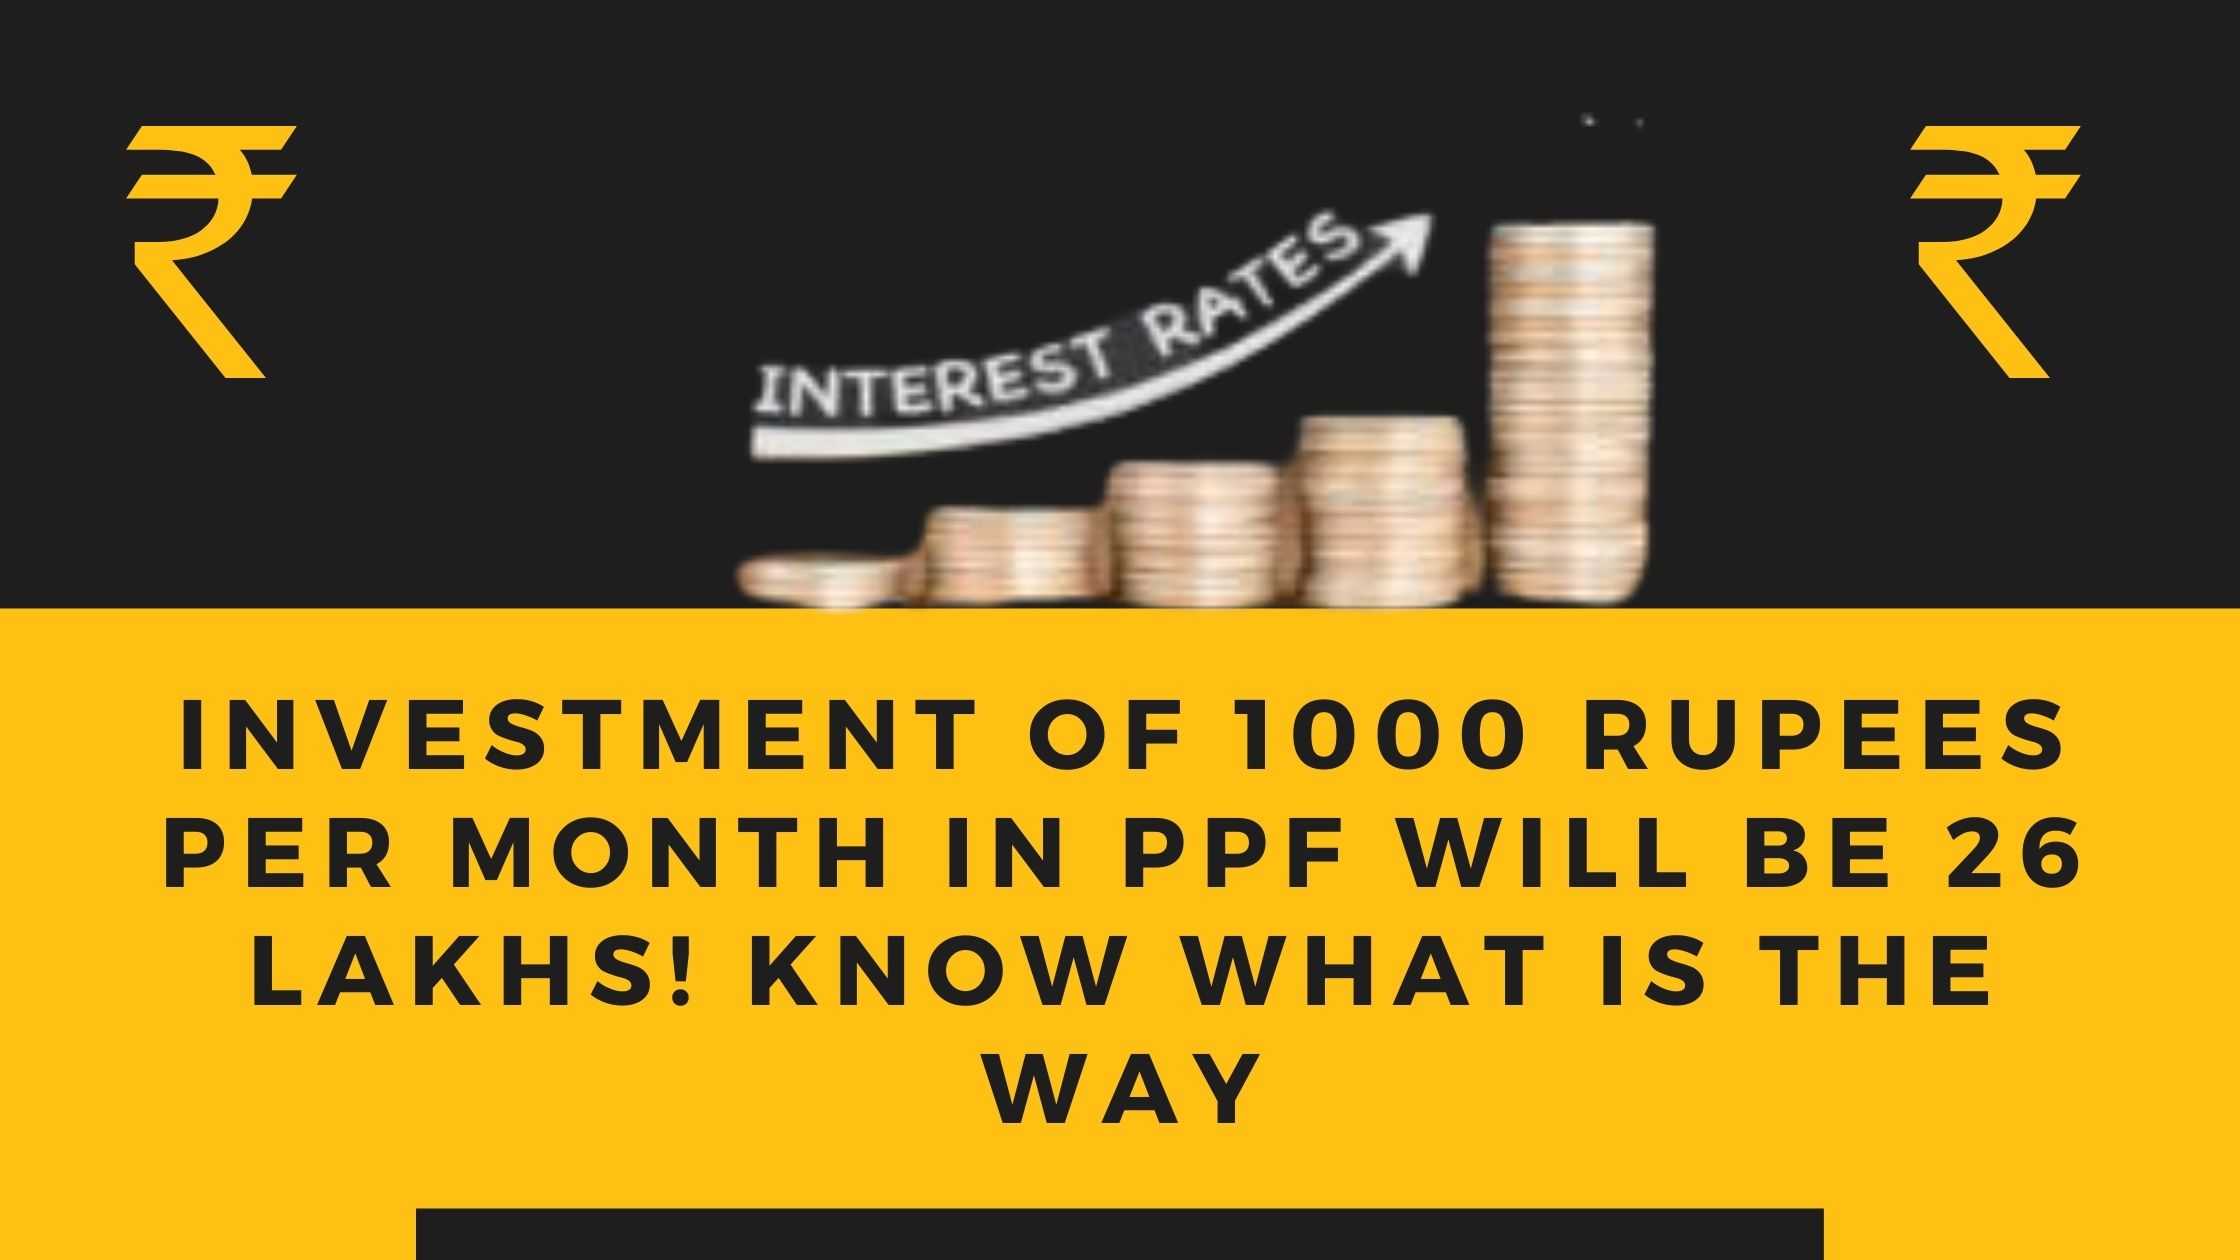 Investment of 1000 rupees per month in PPF will be 26 lakhs! Know what is the way